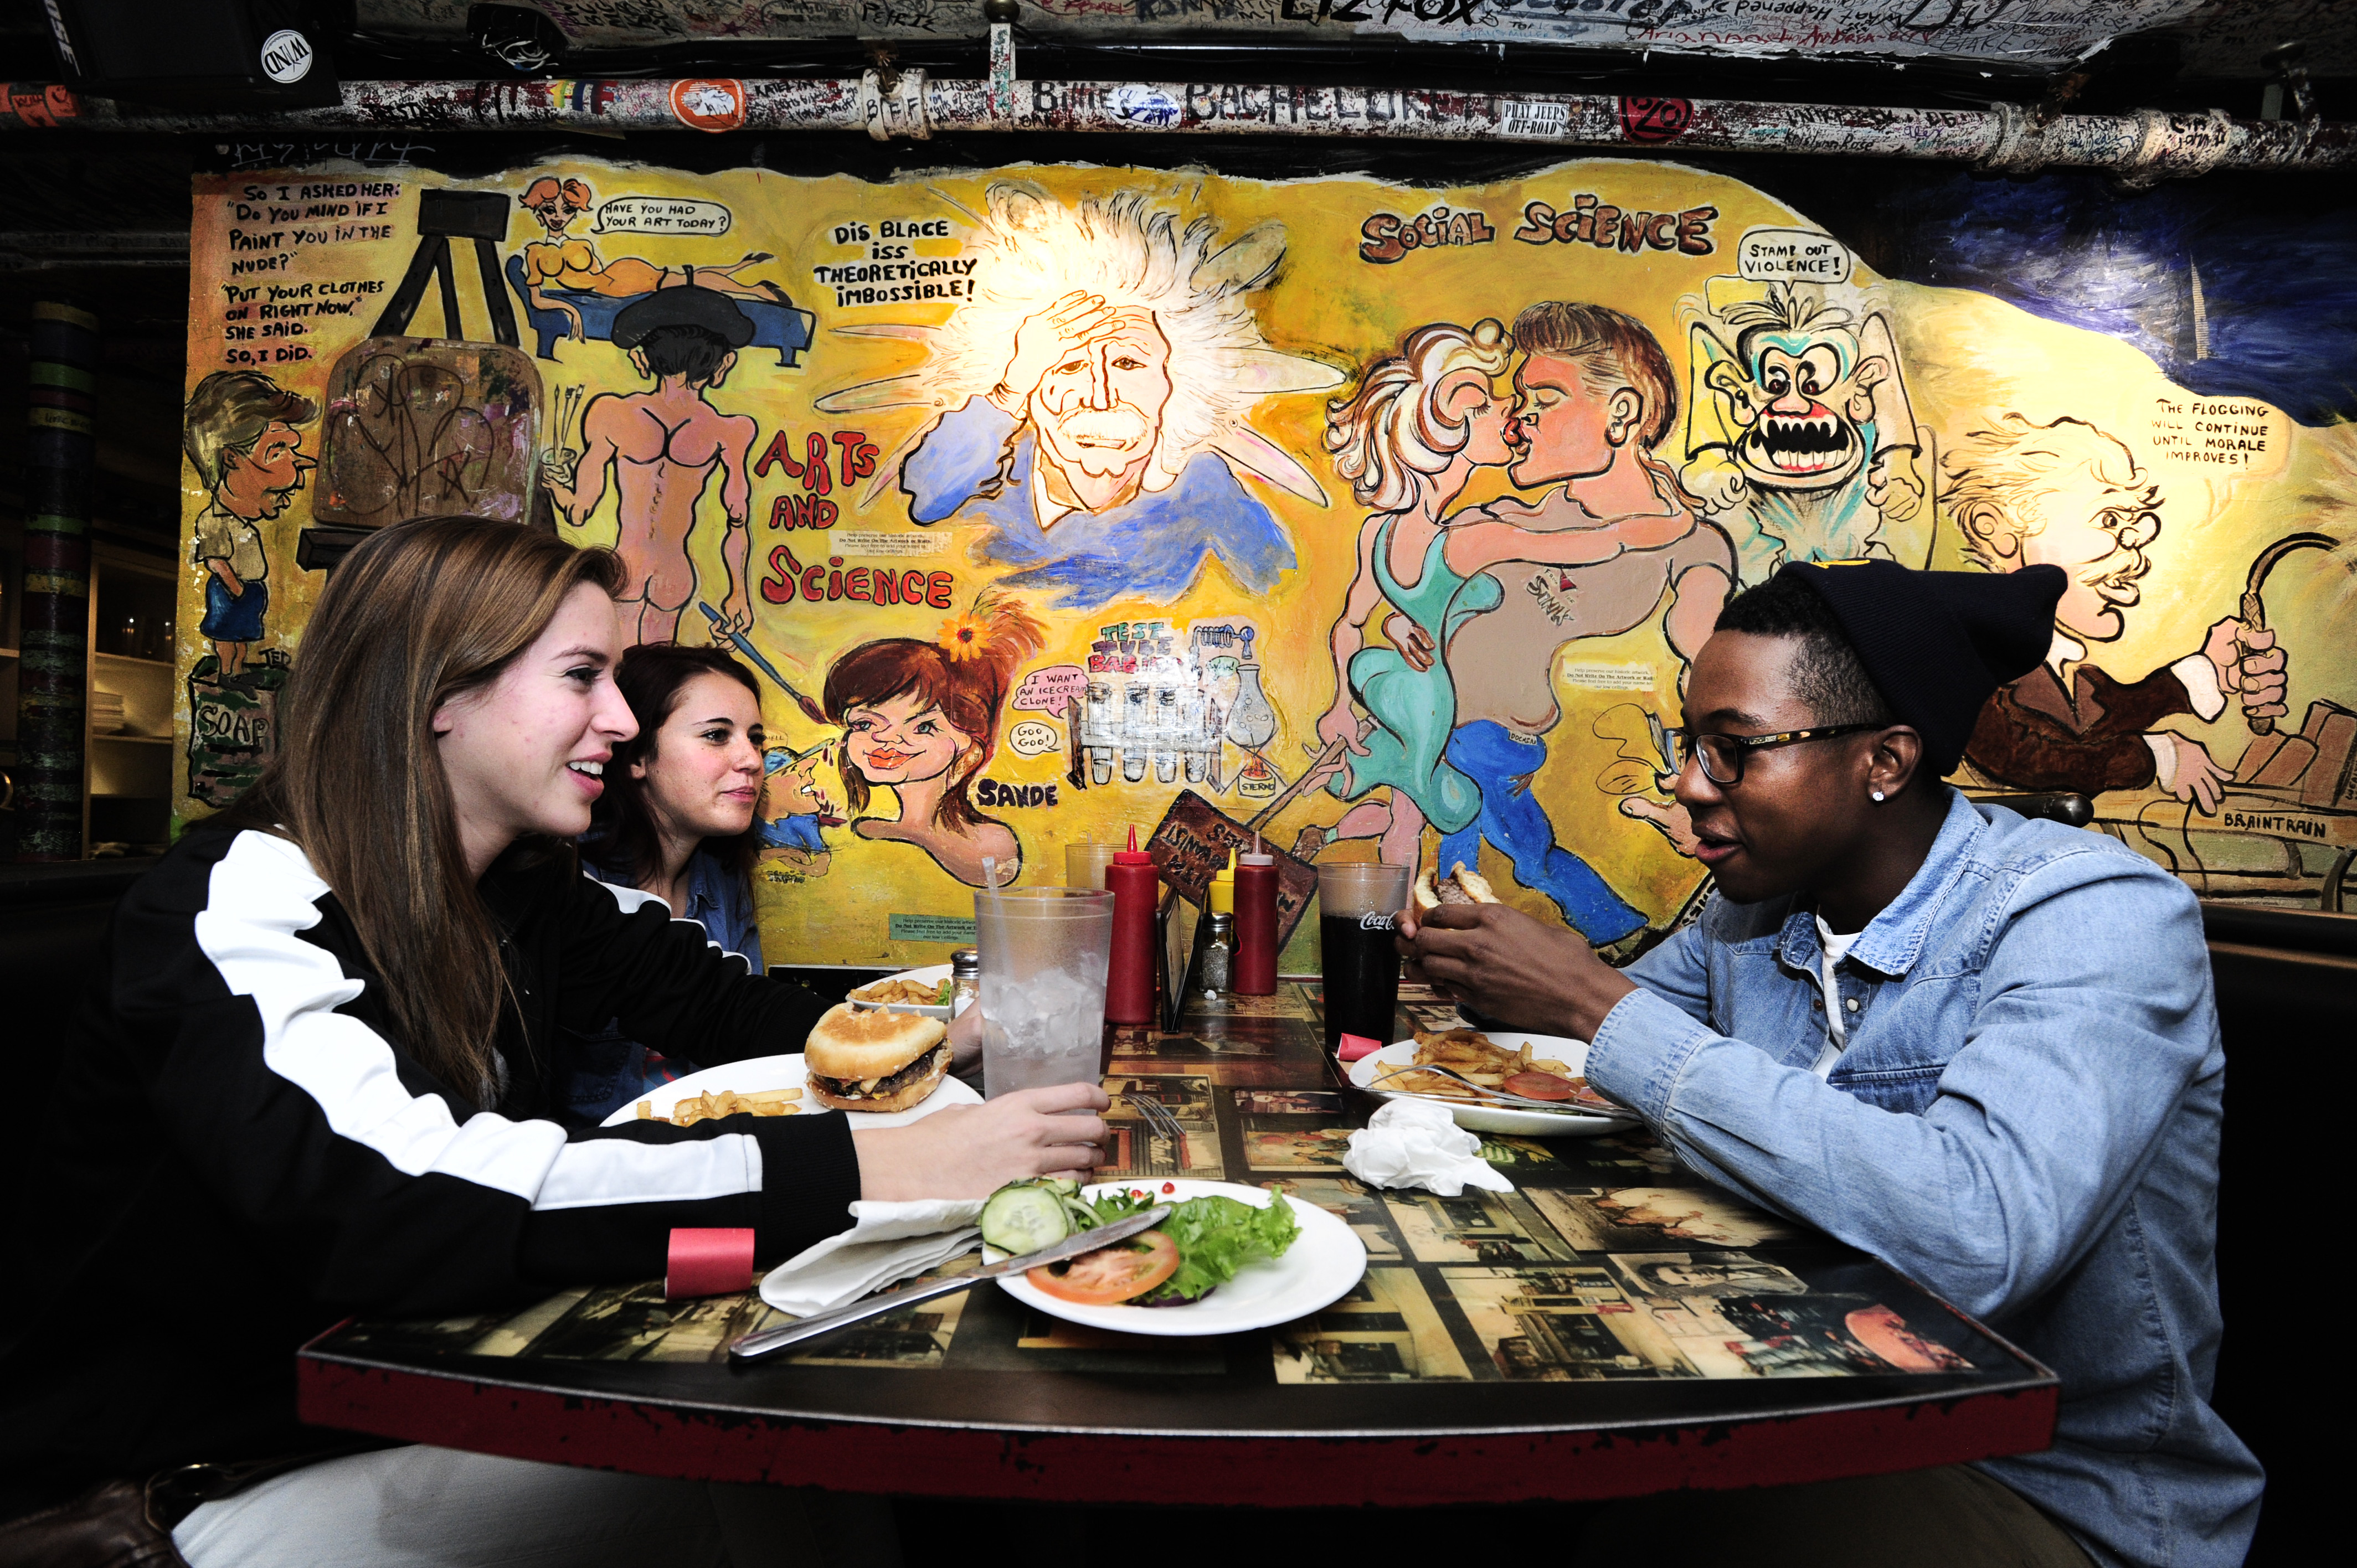 Three customers enjoy a meal in front of a large cartoon mural covering the wall.